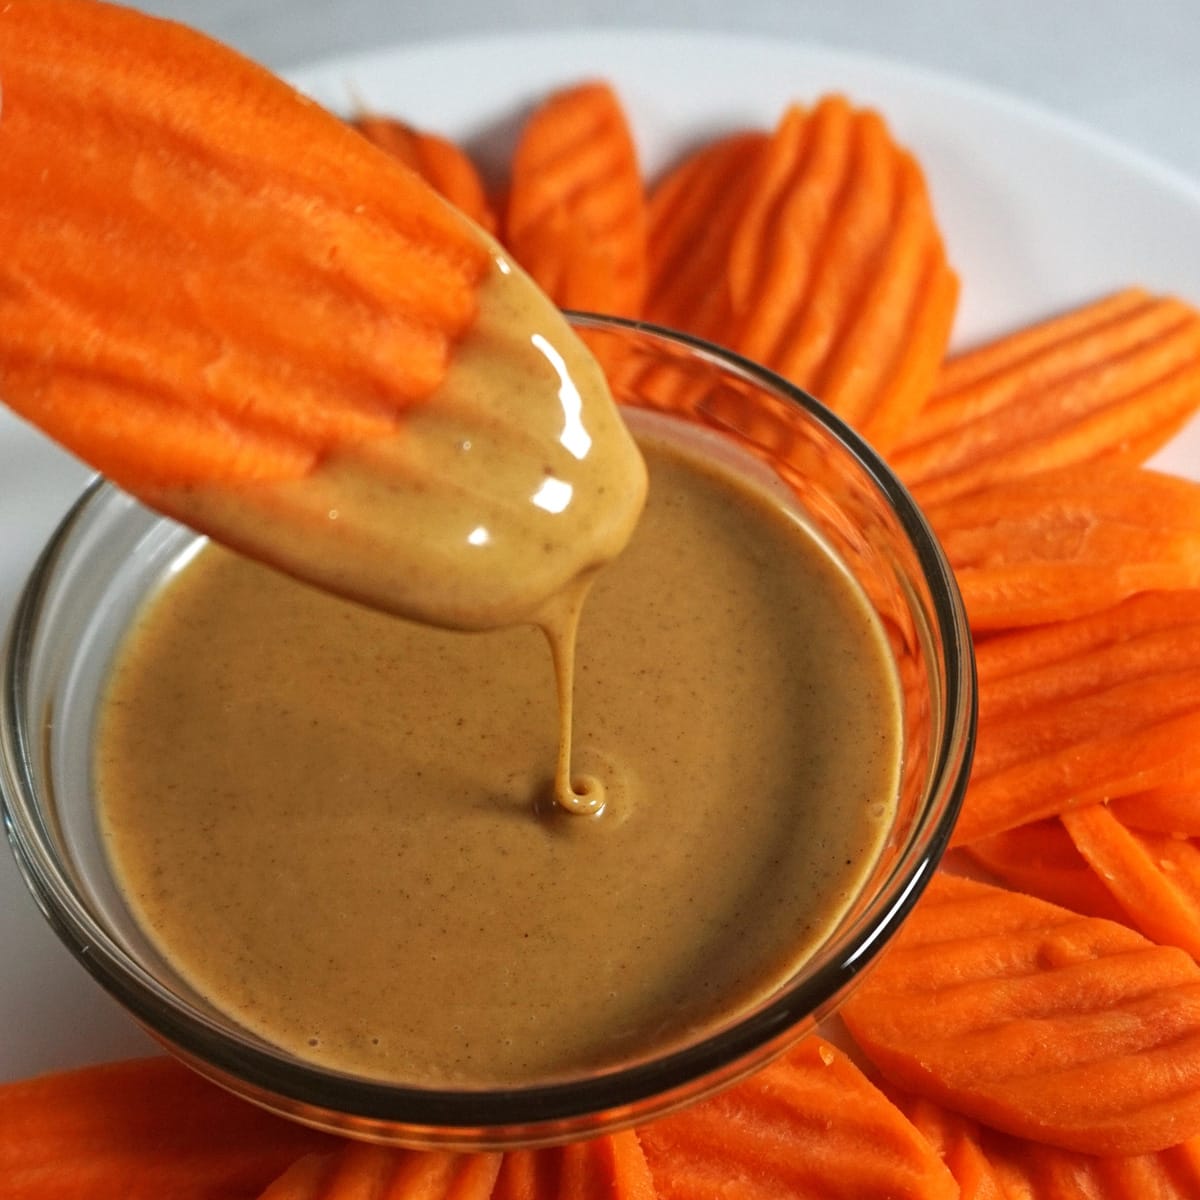 Keto snack: carrots and peanut butter mixed with MCT oil